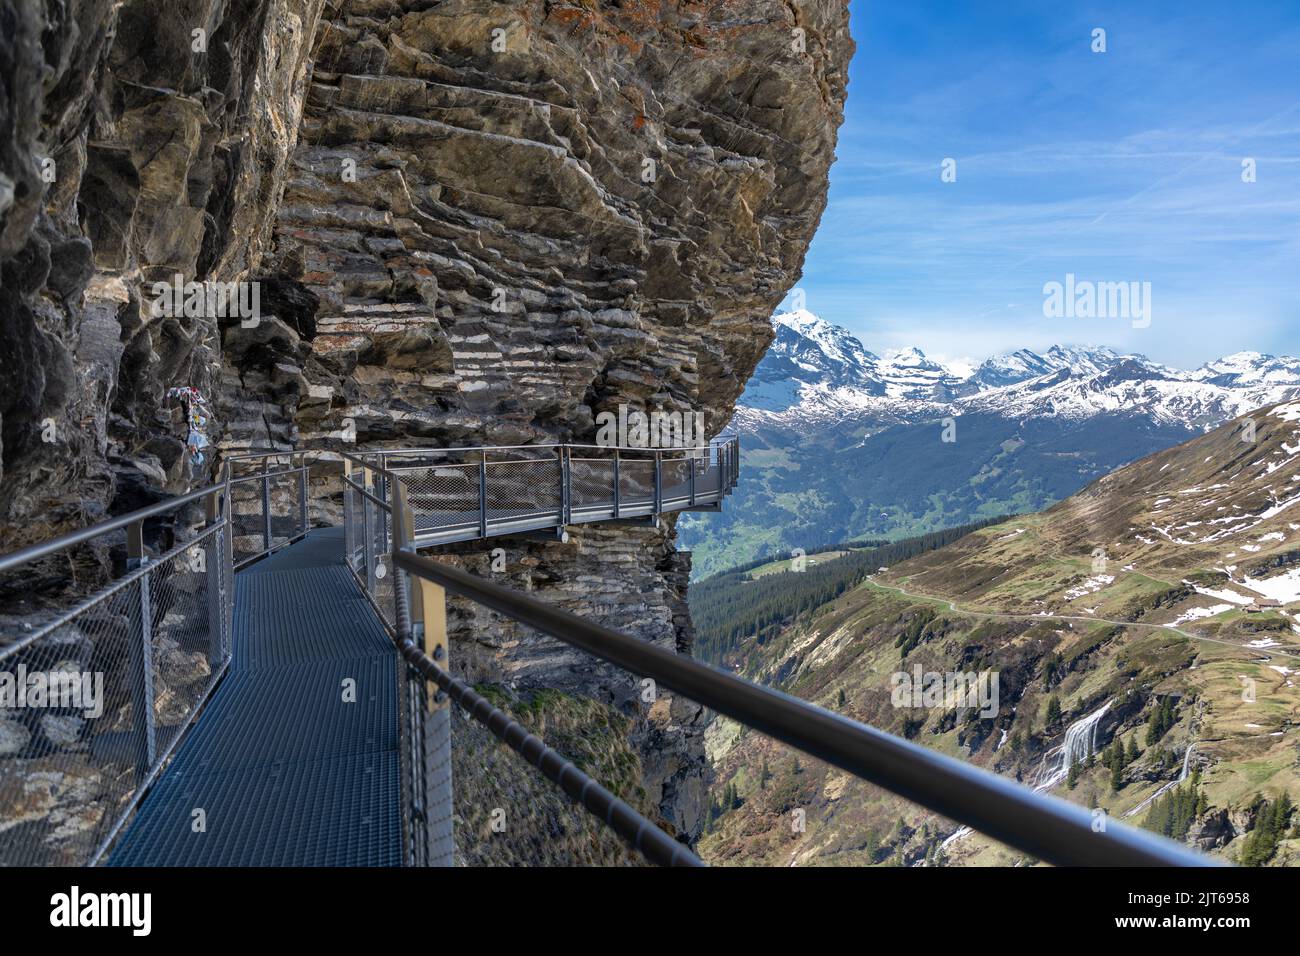 Metal walkway on the side of a cliff in the Swiss Alps, the area is know as First mountain. In the background snow capped mountains Stock Photo